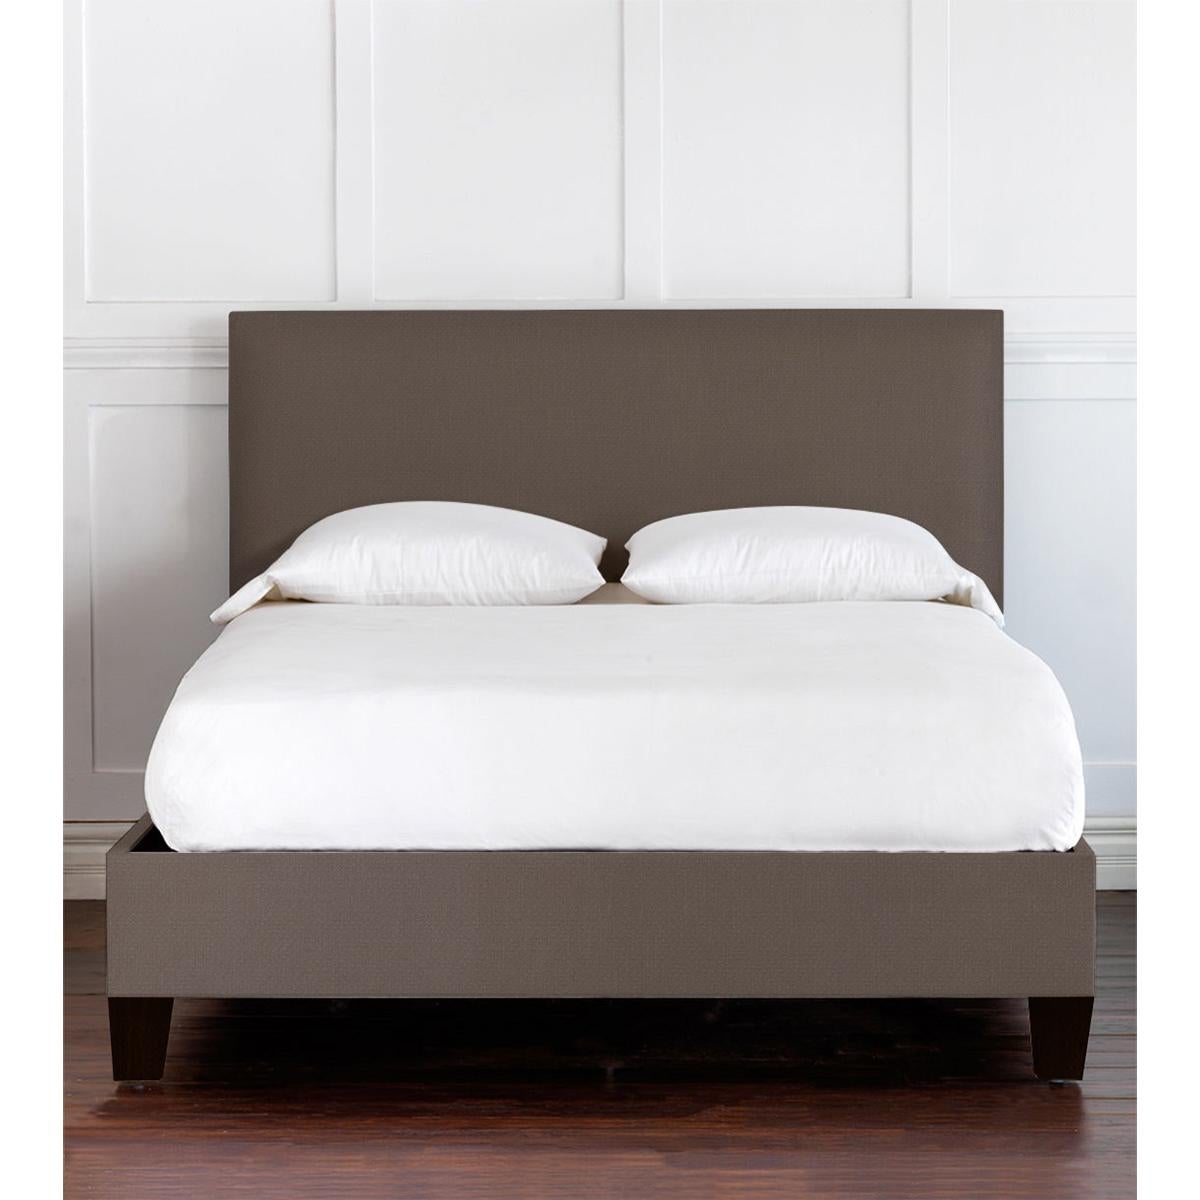 Upholstered Bed Frame, as part of our Made in America quick ship program, these beds are ready within a week to ship. 

With its streamlined low-profile design, simply sophisticated with full upholstery to the thickly padded upholstered headboard,